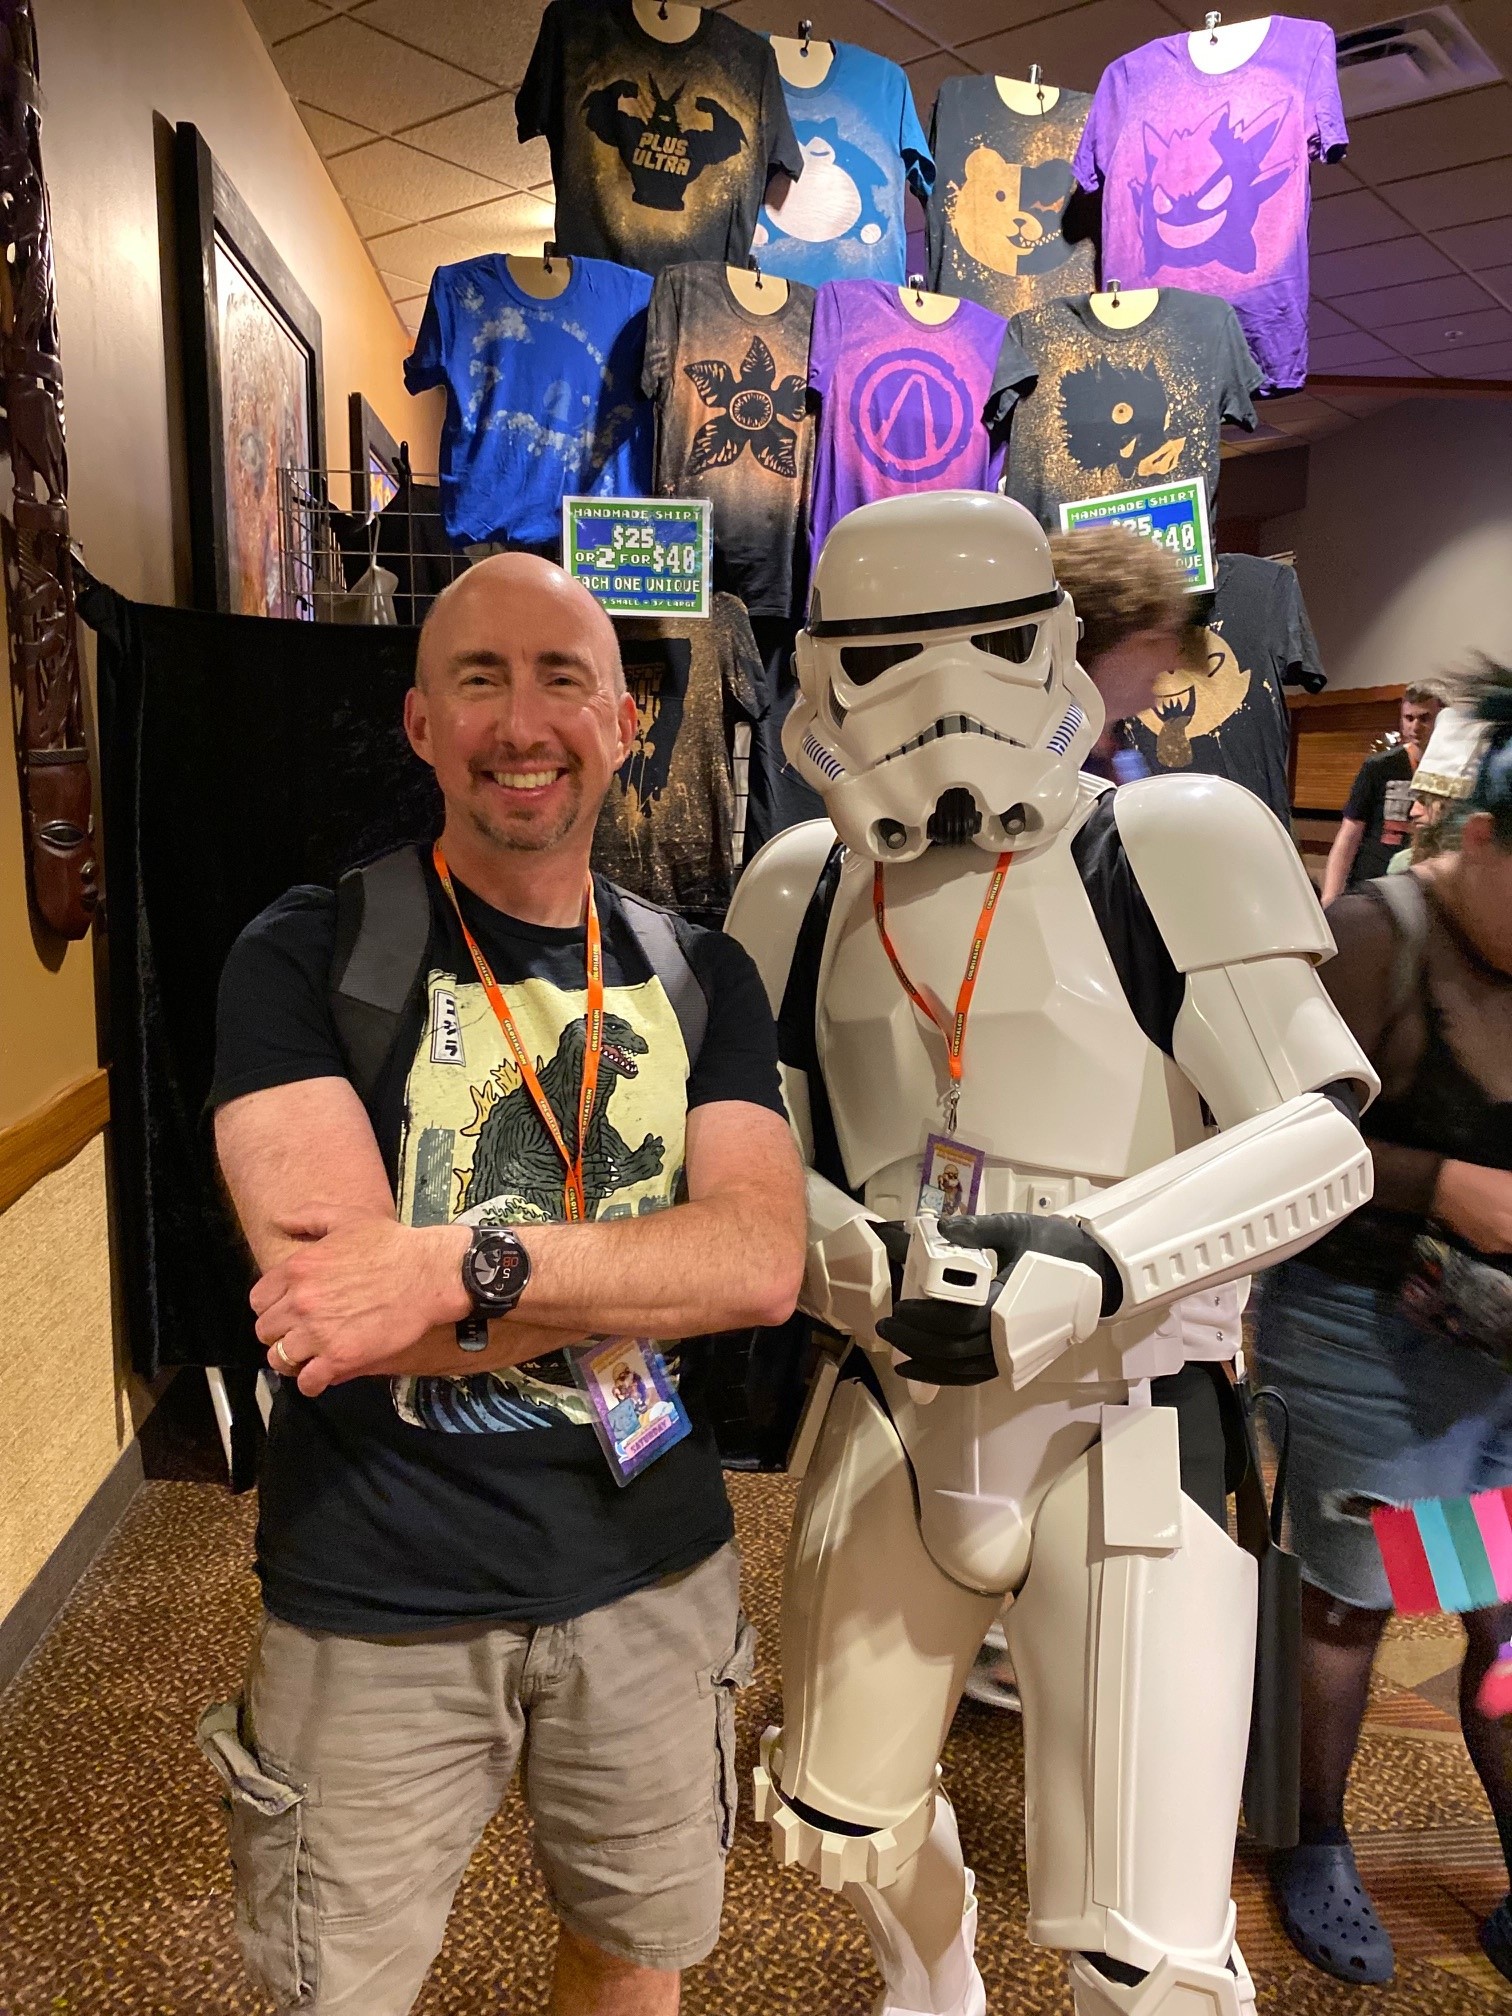 Myself (Mike Pawuk) standing next to a Stormtrooper while enjoying the Colossal Con convention. 